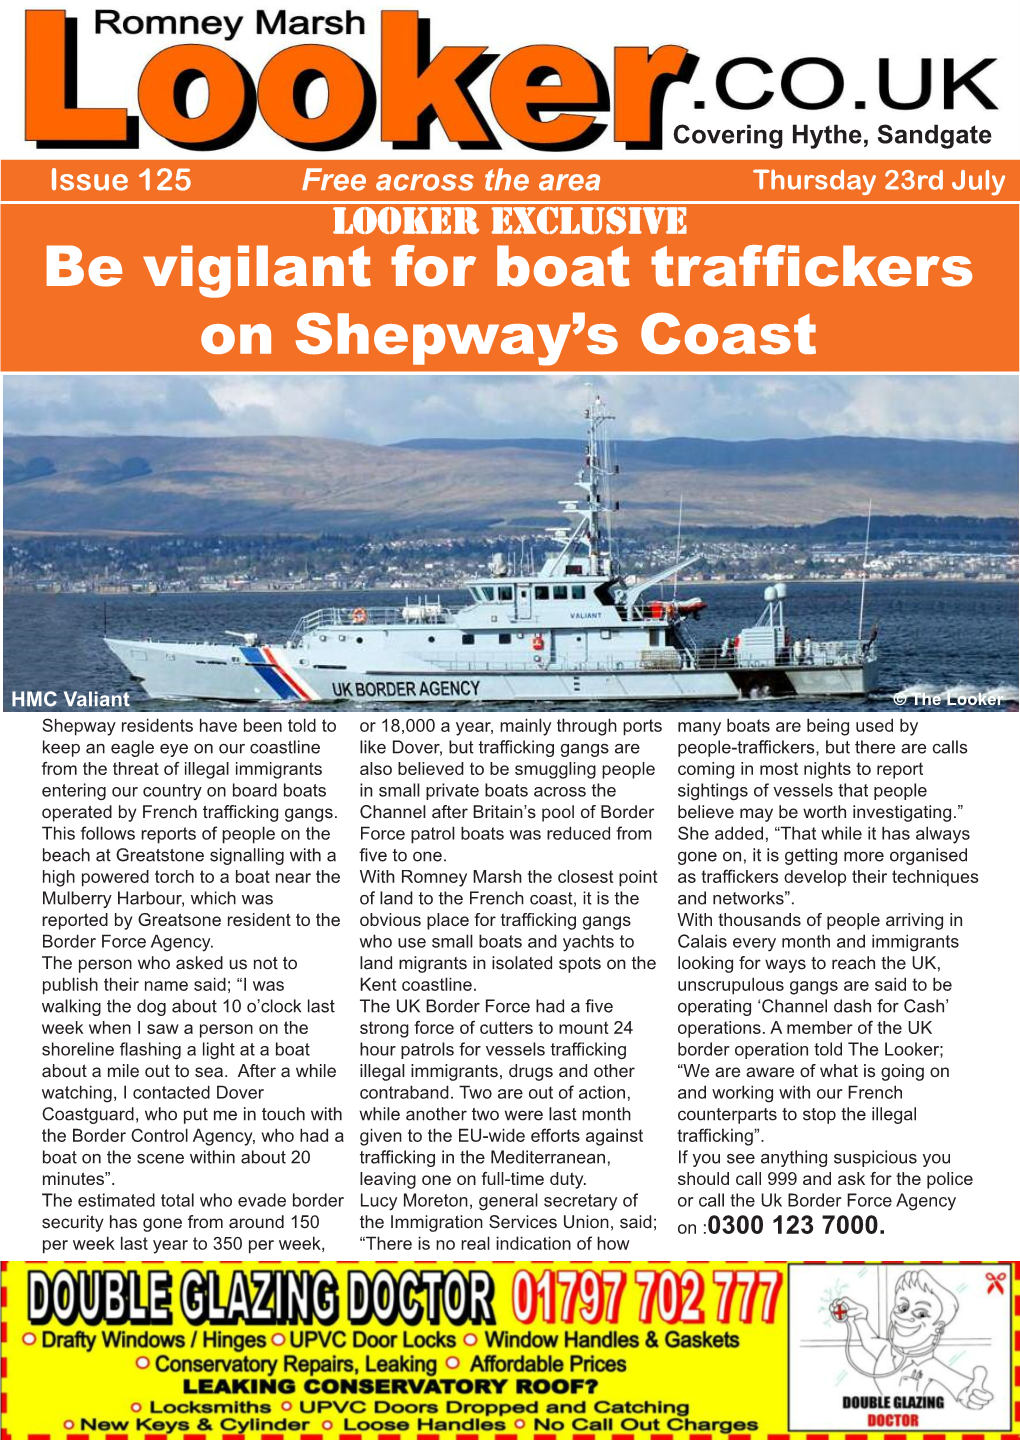 Be Vigilant for Boat Traffickers on Shepway's Coast